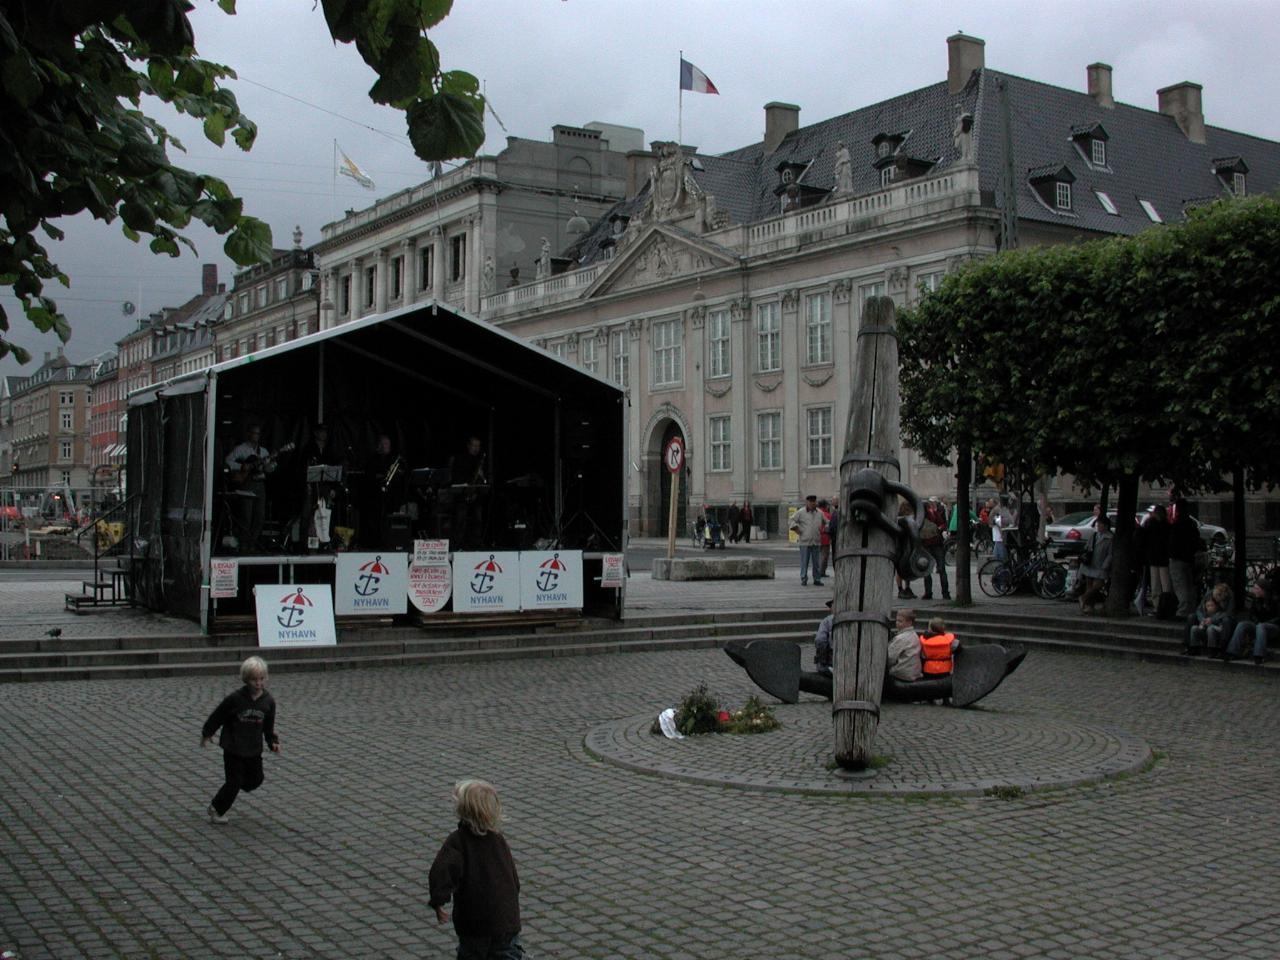 KPLU Viking Jazz: Jazz stage at Nyhavn, just in front of Kings Nytorv (King's New Square), under renovation